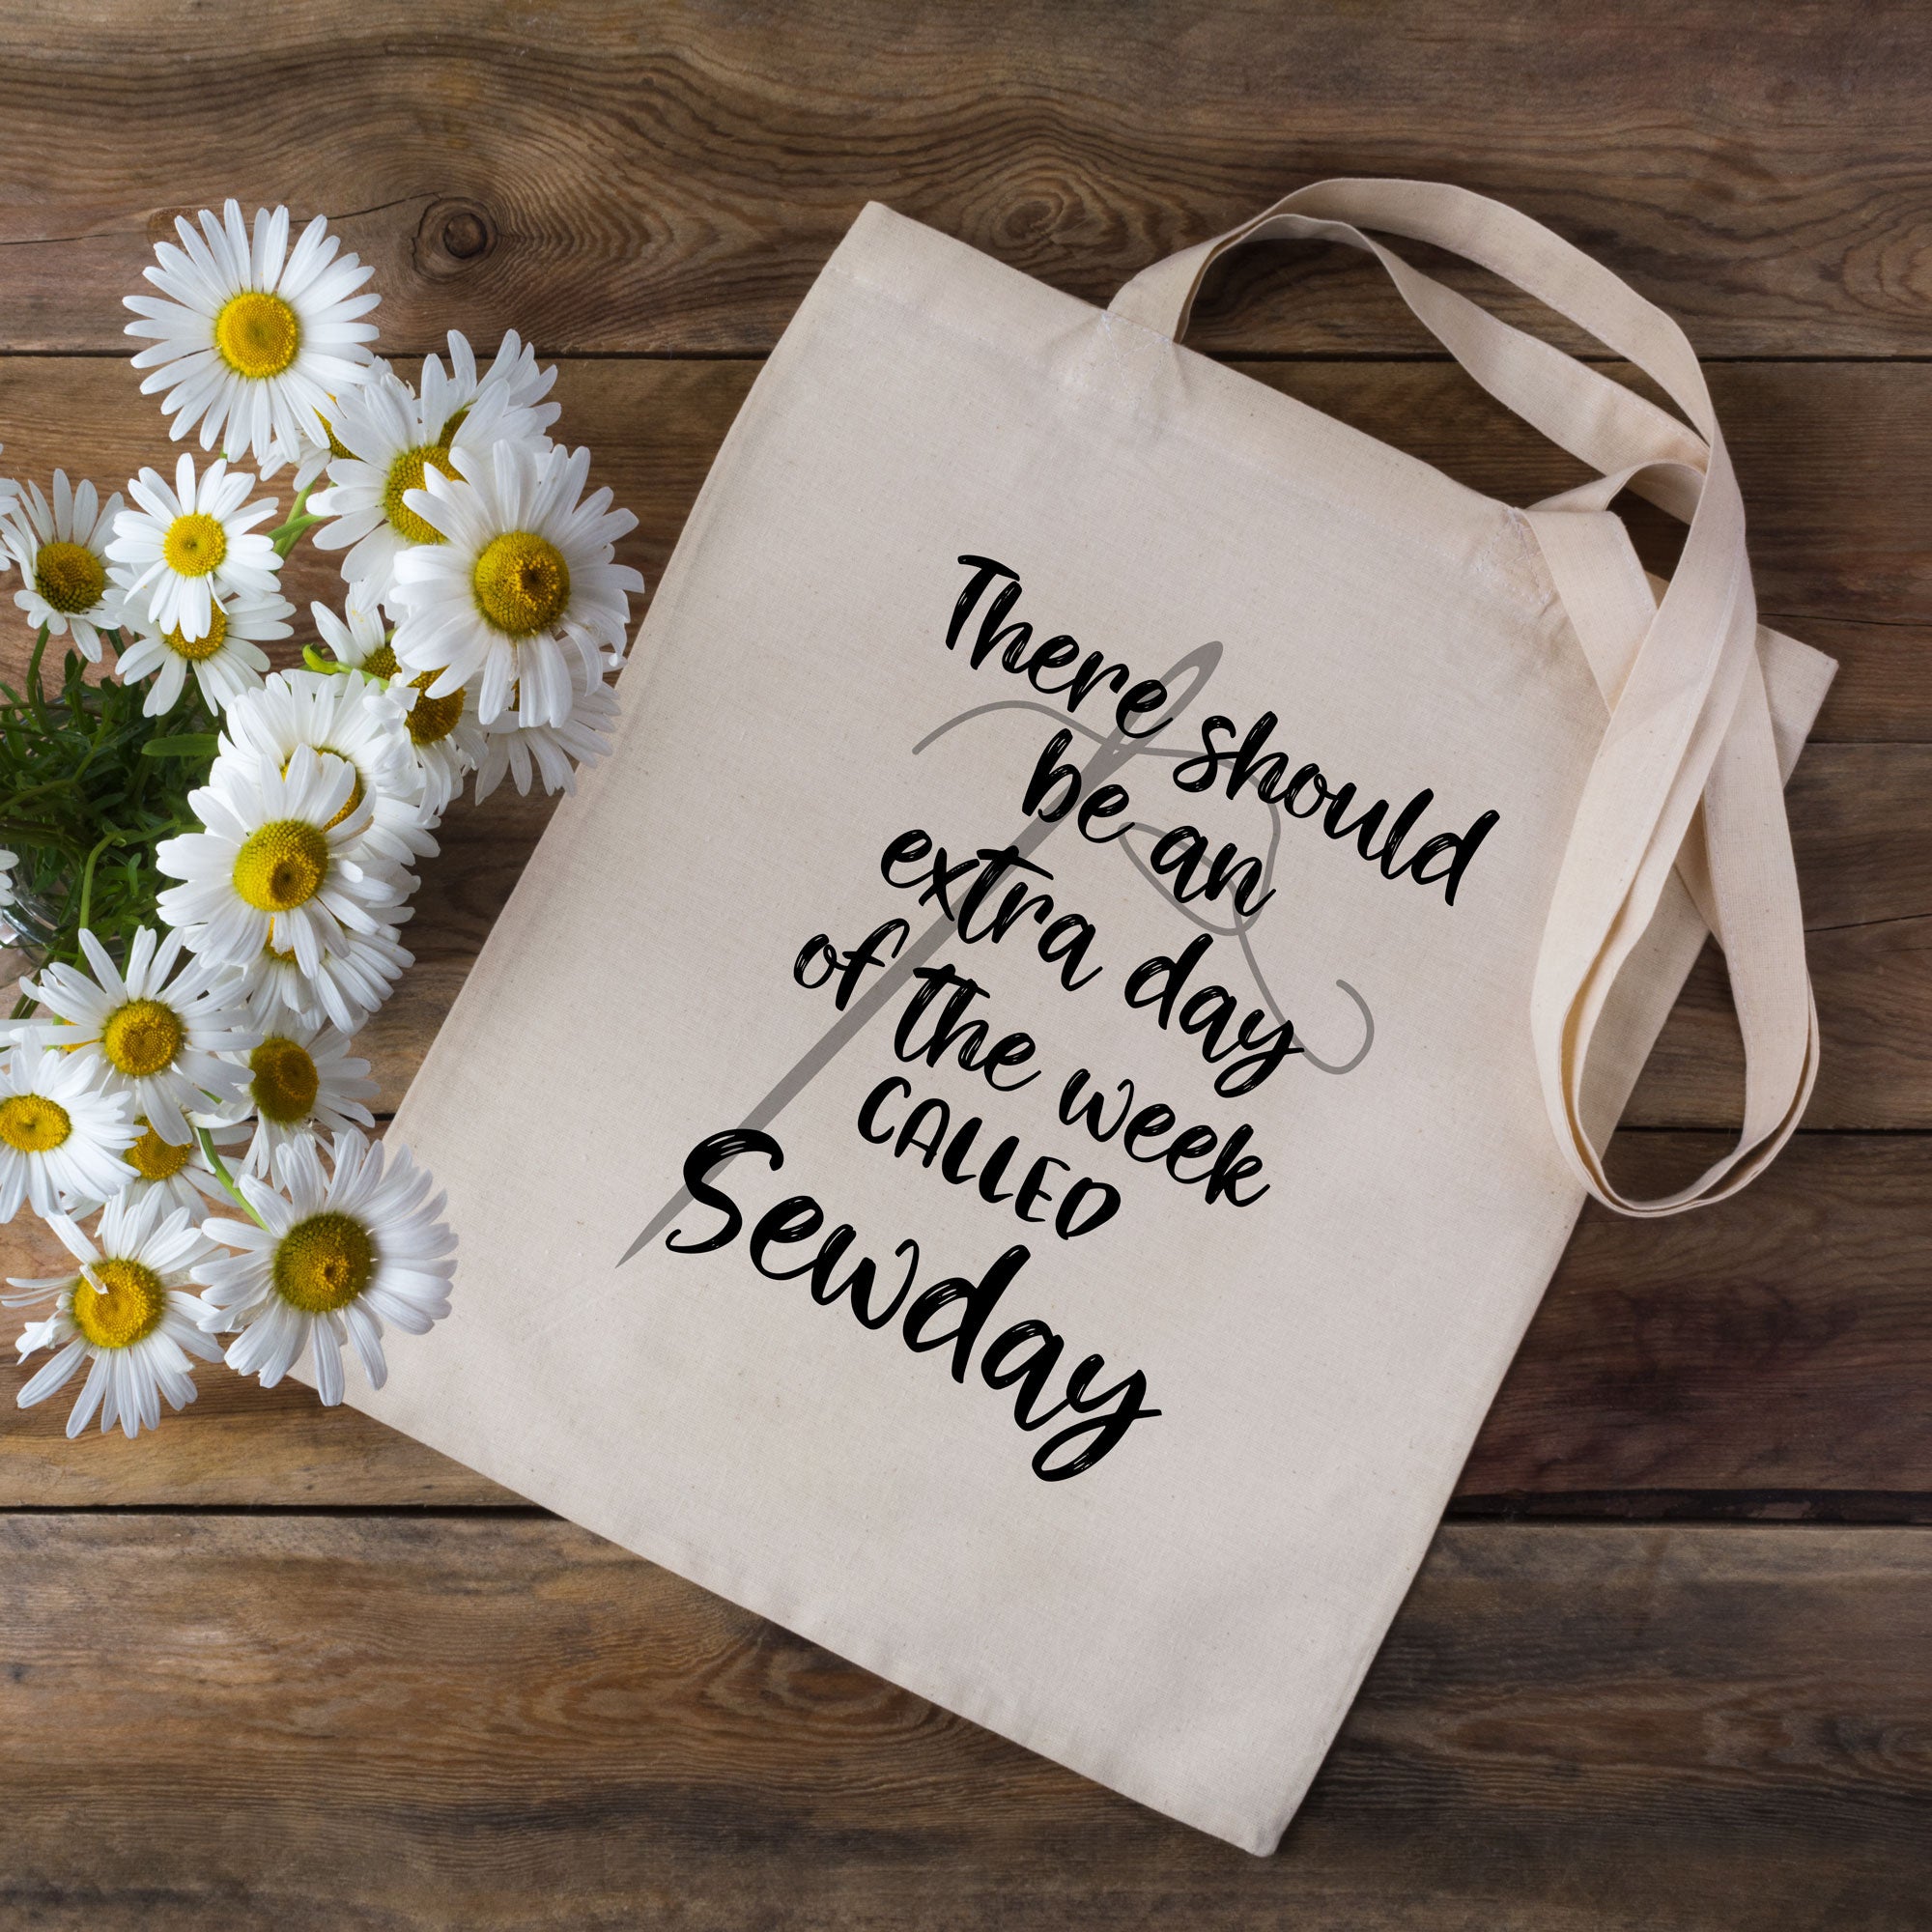 There Should Be An Extra Day Of The Week Called Sewday - Sewing Tote Bag